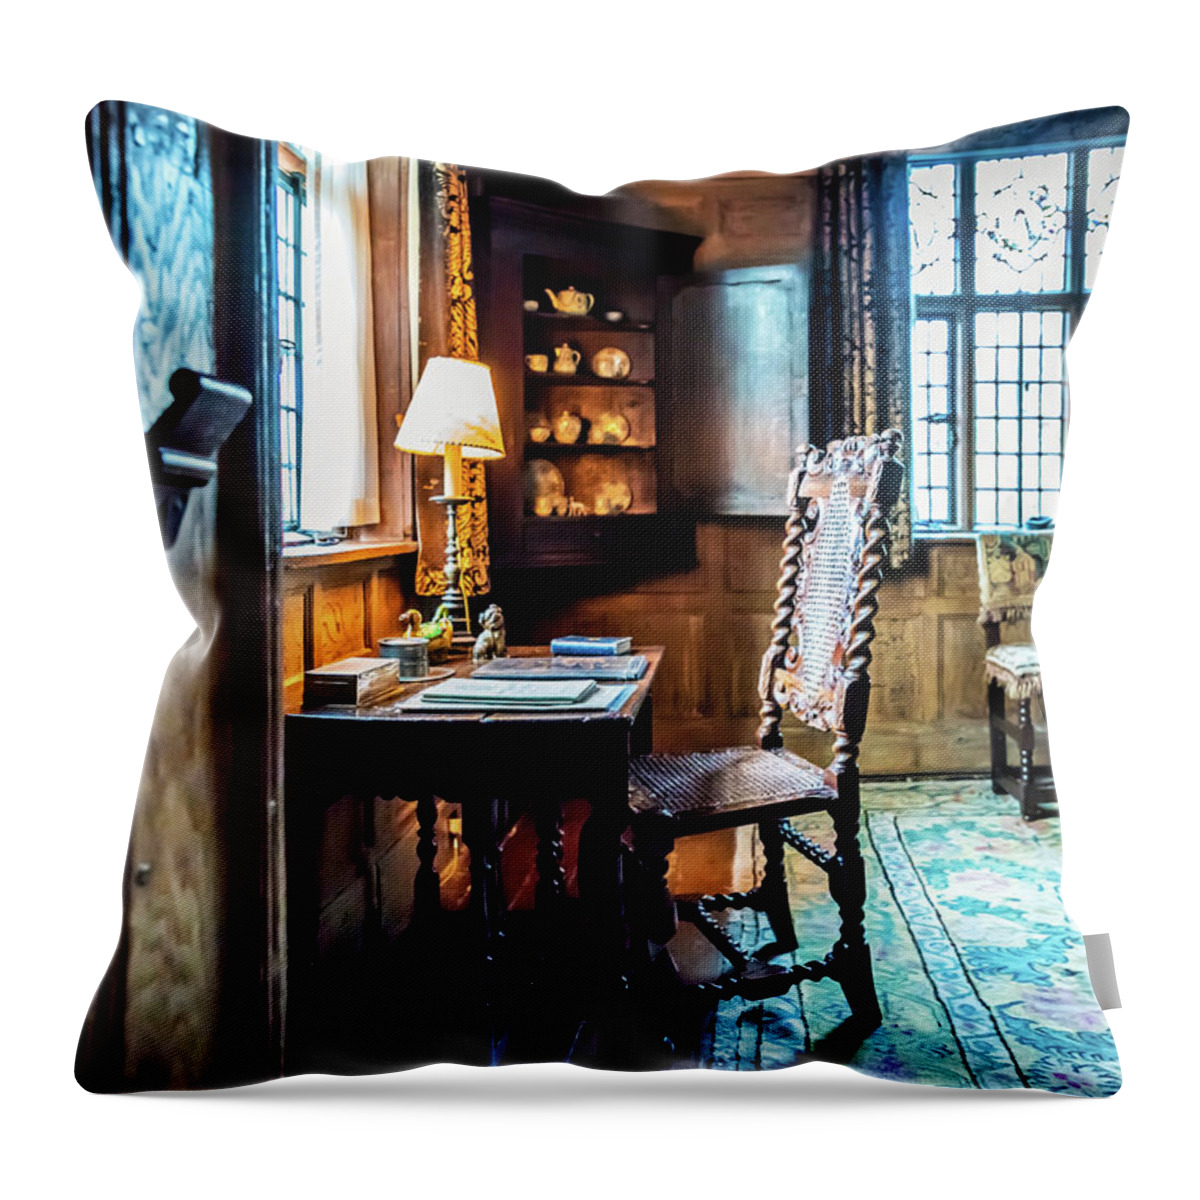 Stately Home Throw Pillow featuring the photograph Stately Home by Nick Bywater